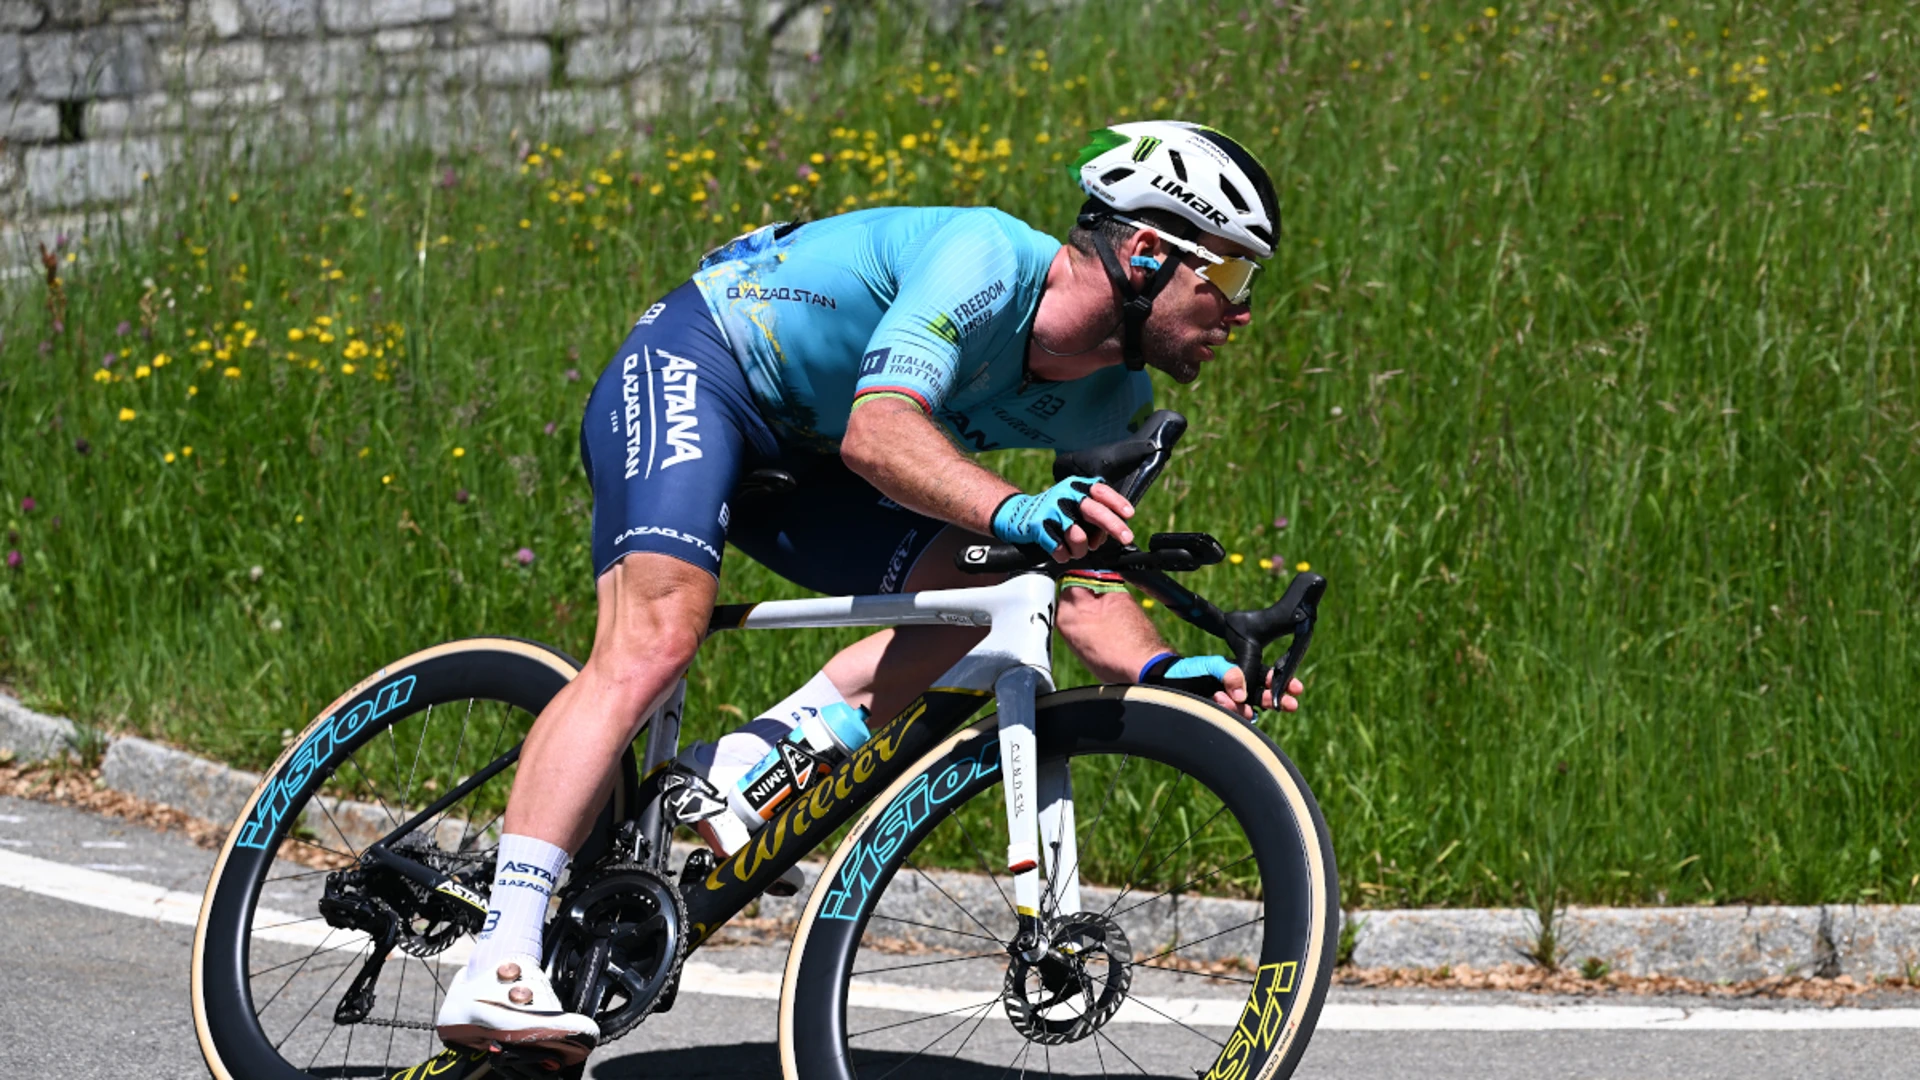 Confident Cavendish gearing up for record breaking Tour stage win